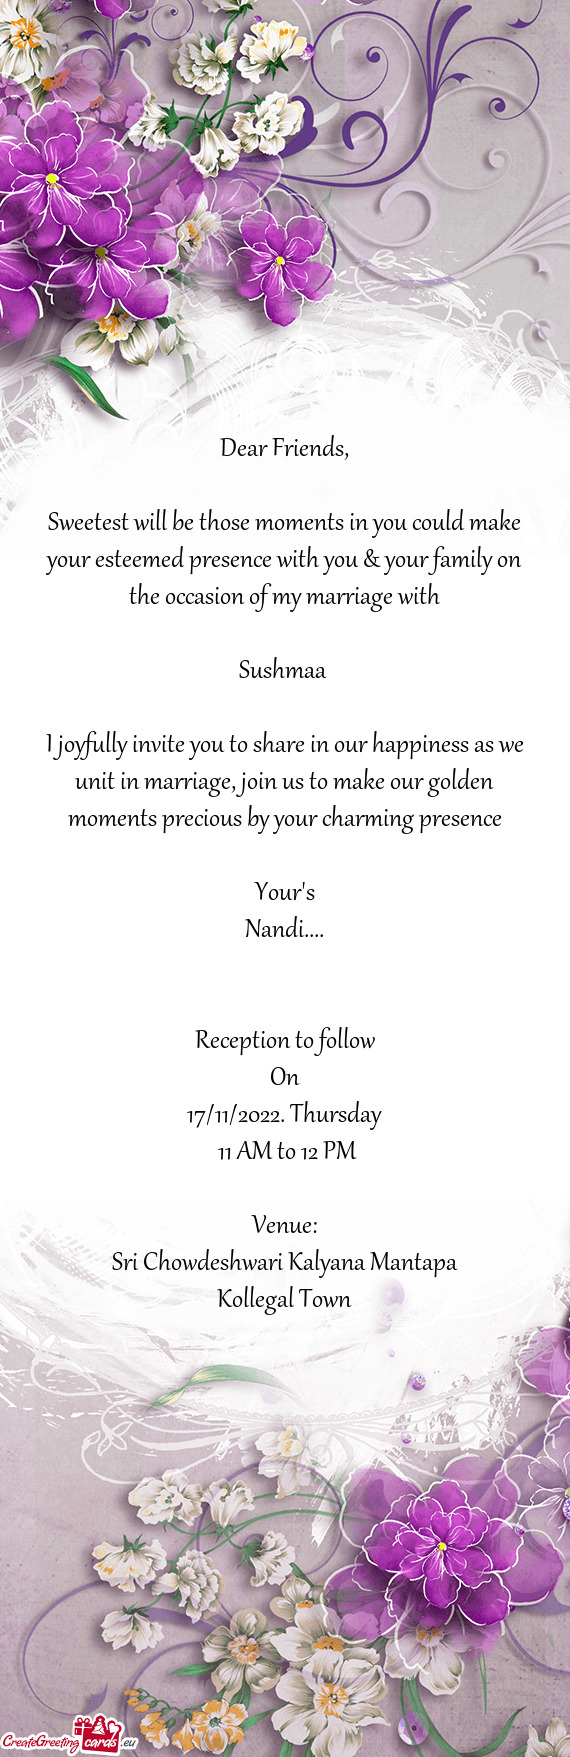 I joyfully invite you to share in our happiness as we unit in marriage, join us to make our golden m